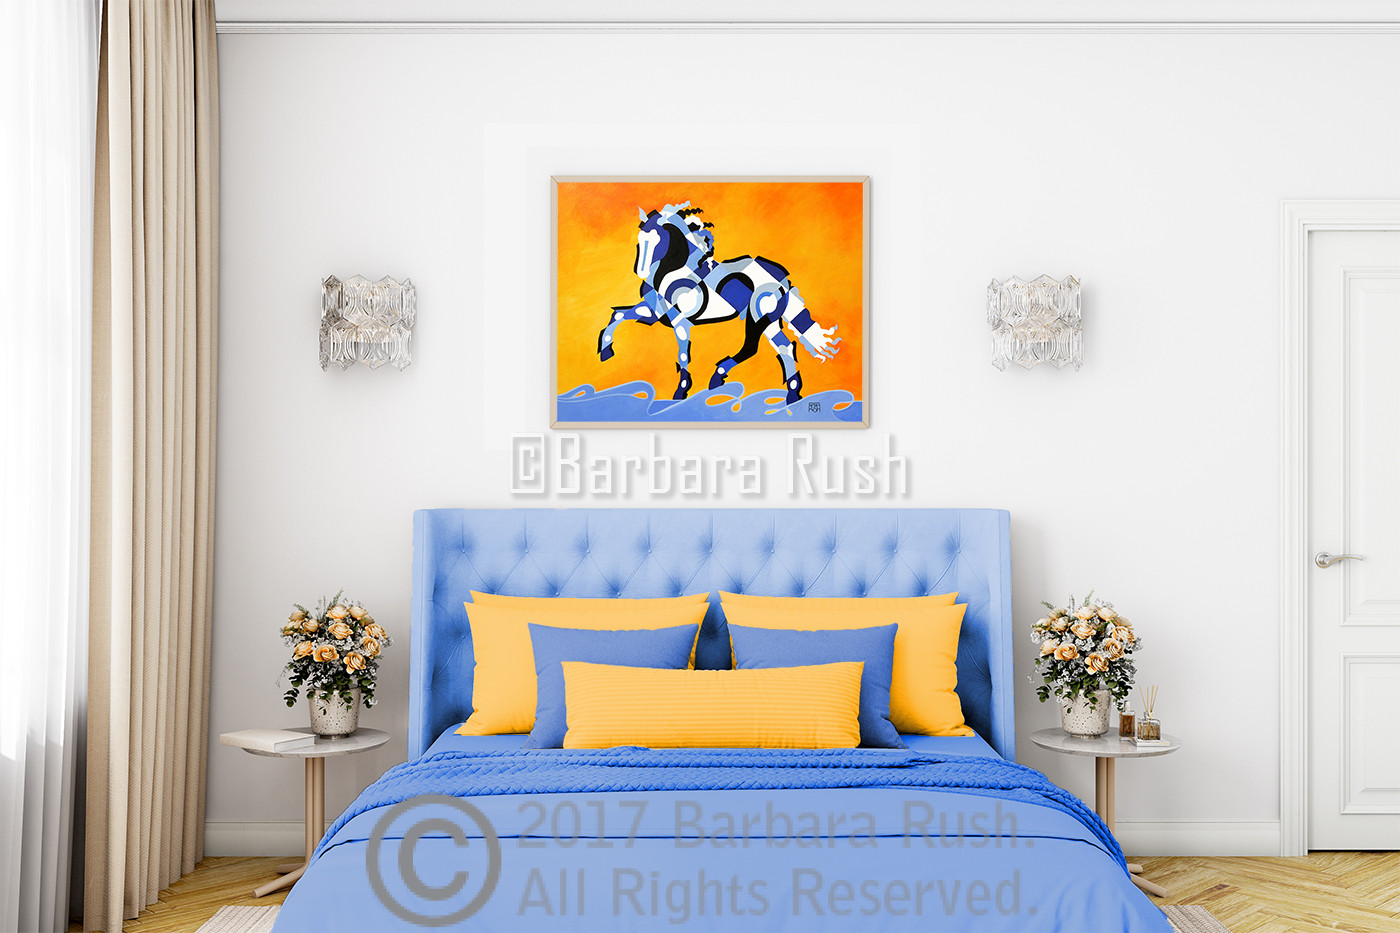 Power of Equus contemporary horse painting